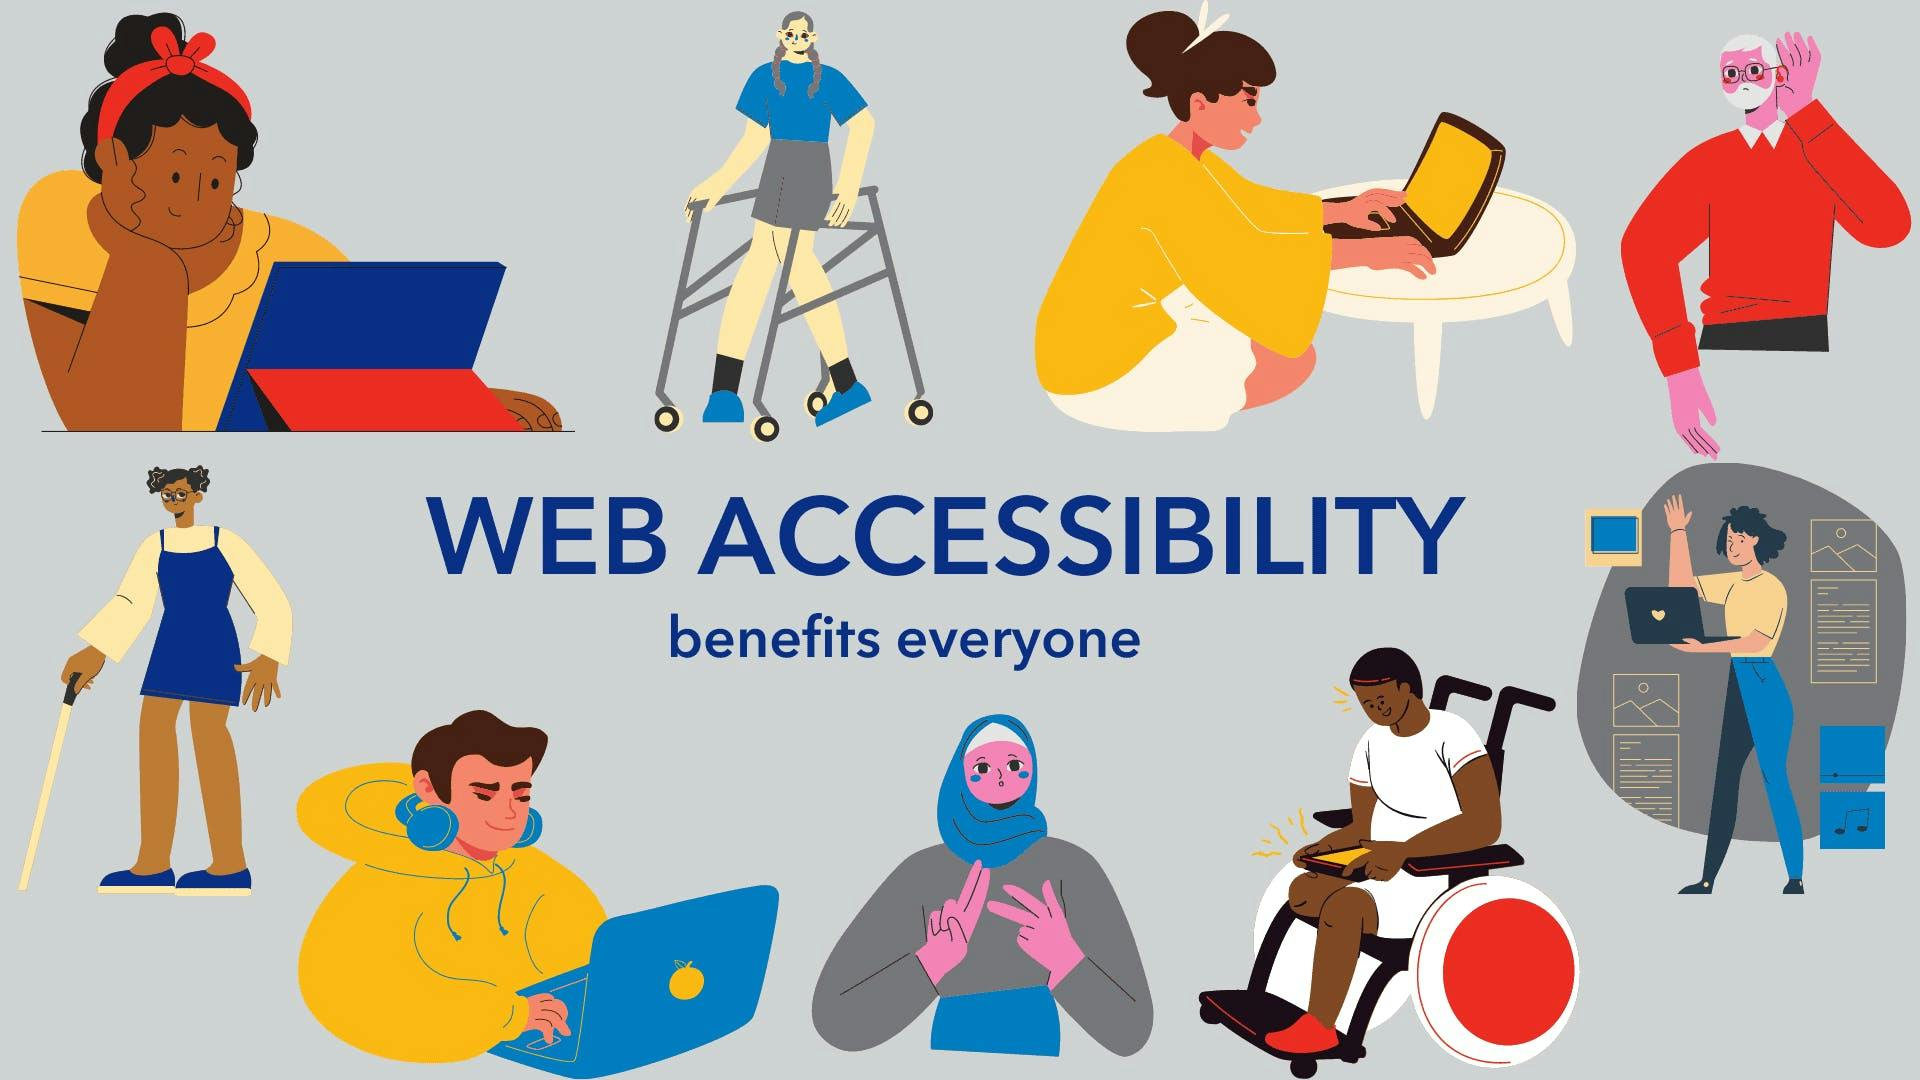 Web accessibility benefits everyone